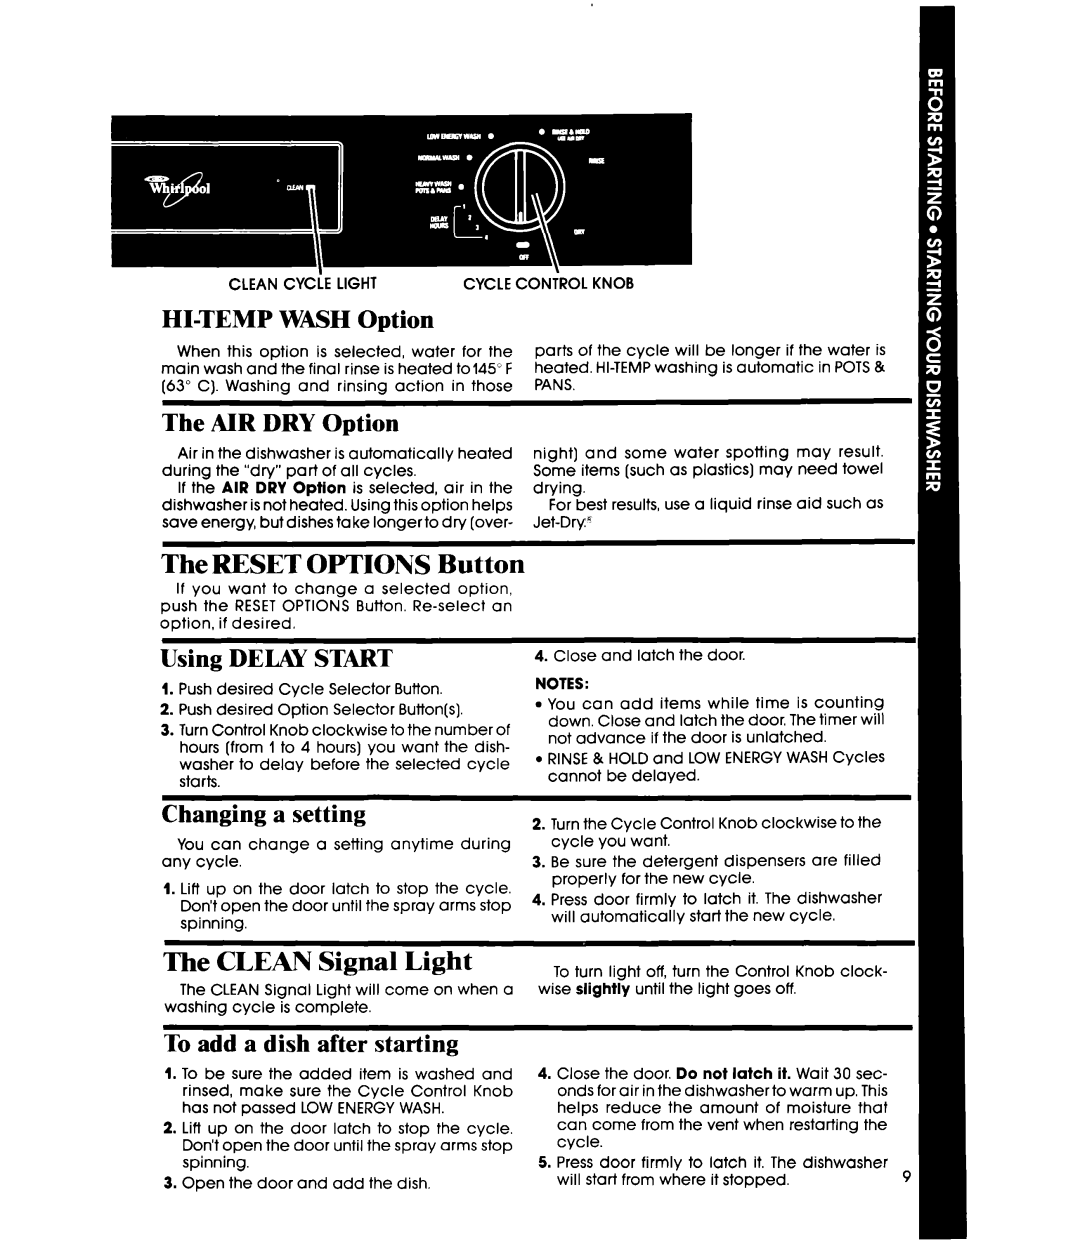 Whirlpool DU87OOXT manual The RESET OPTIONS Button, The CLEAN Signal Light, HI-TEMPWASH Option, The AIR DRY Option 